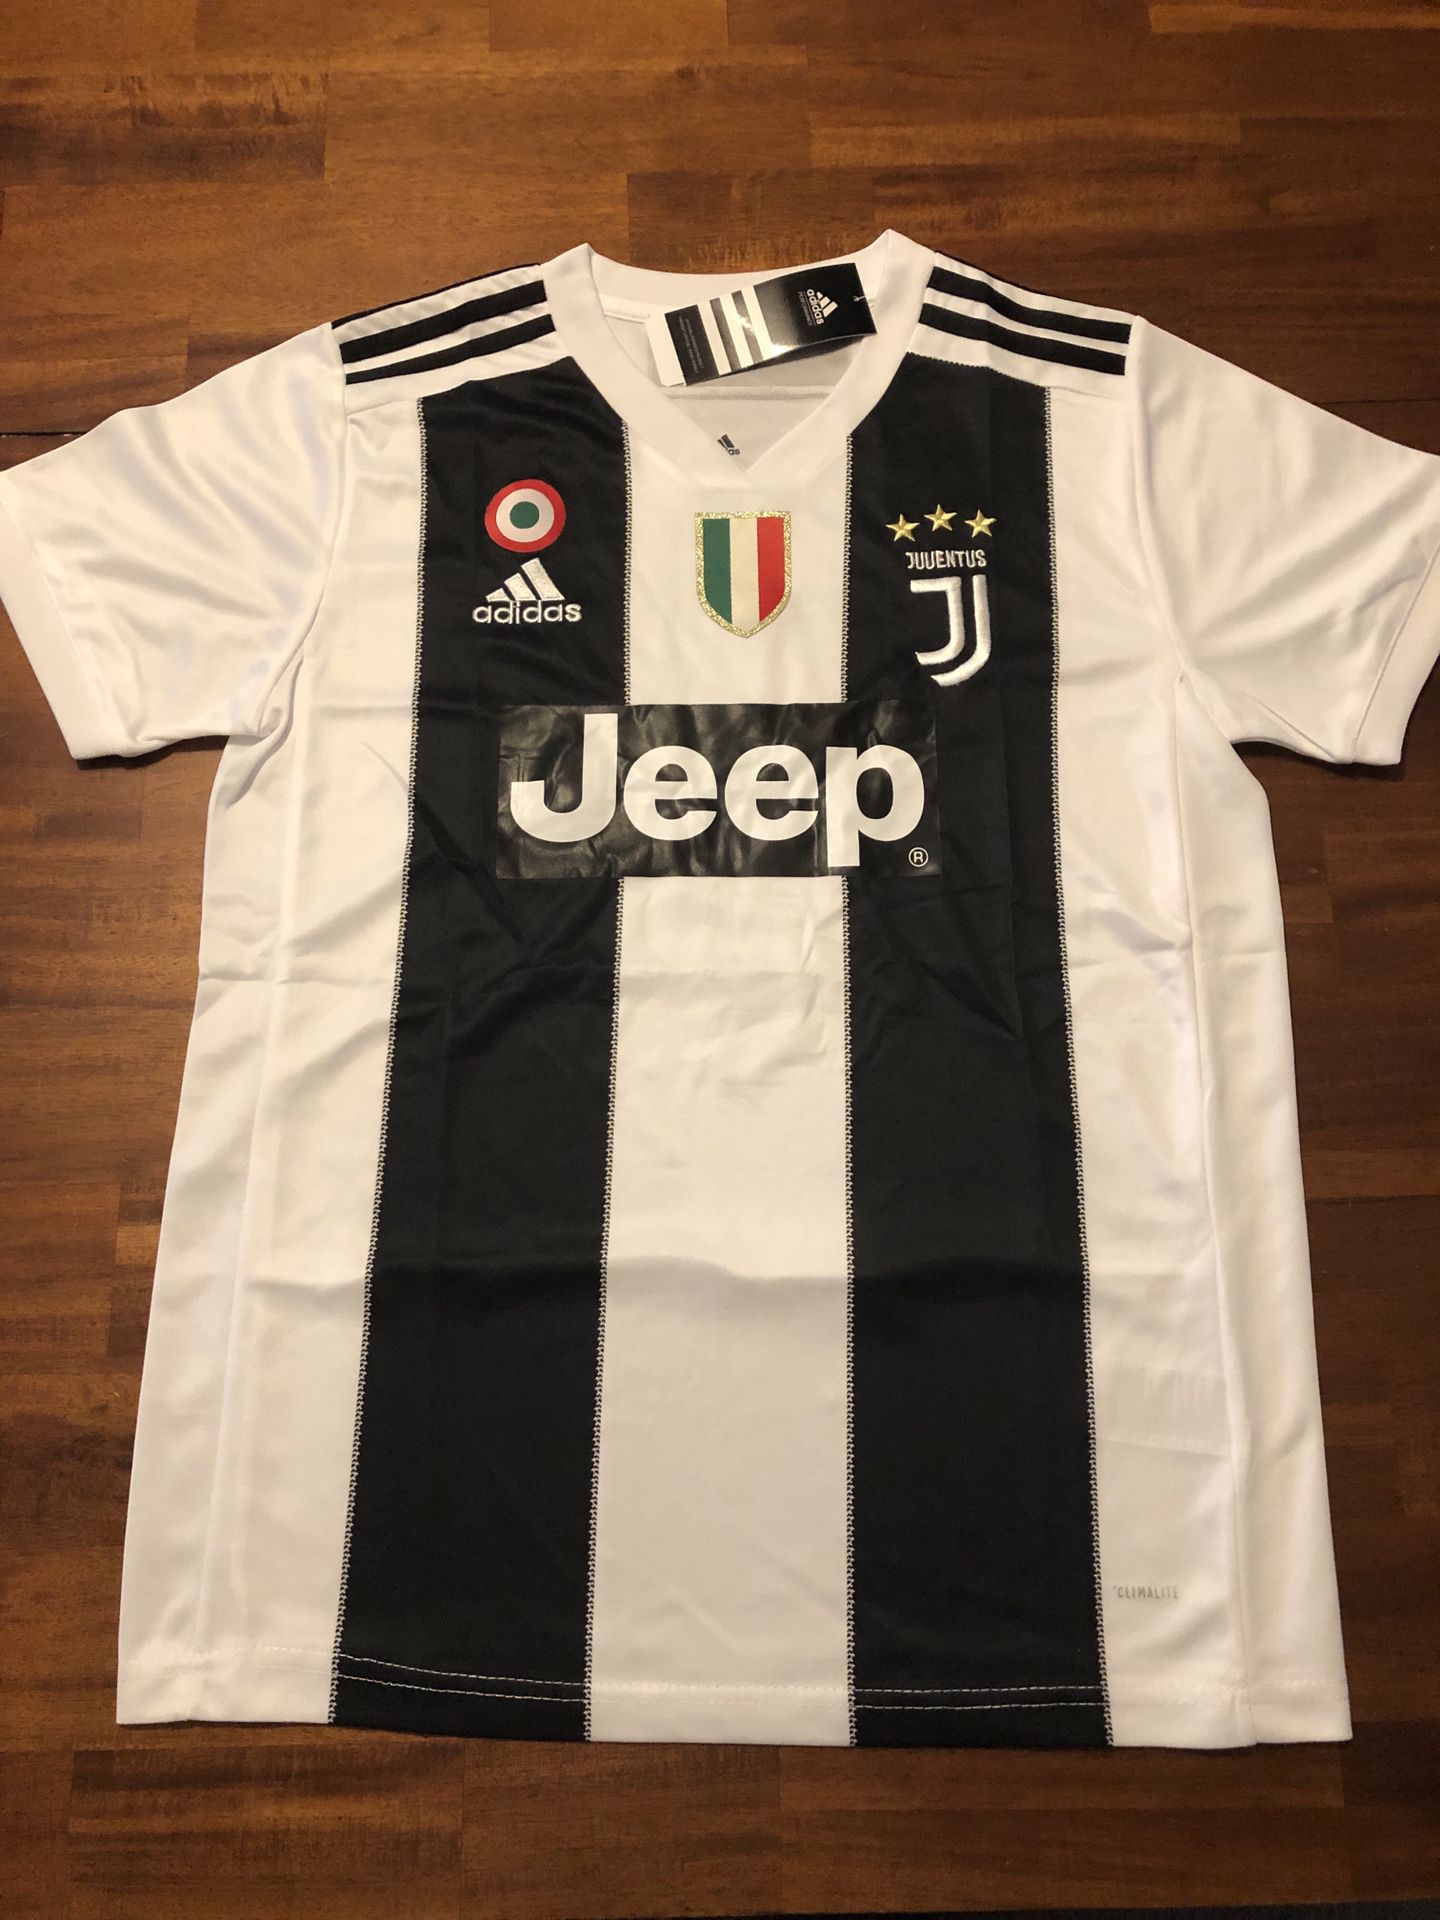 Medium - Juventus - Cristiano Ronaldo Jersey for Sale in Cary, NC